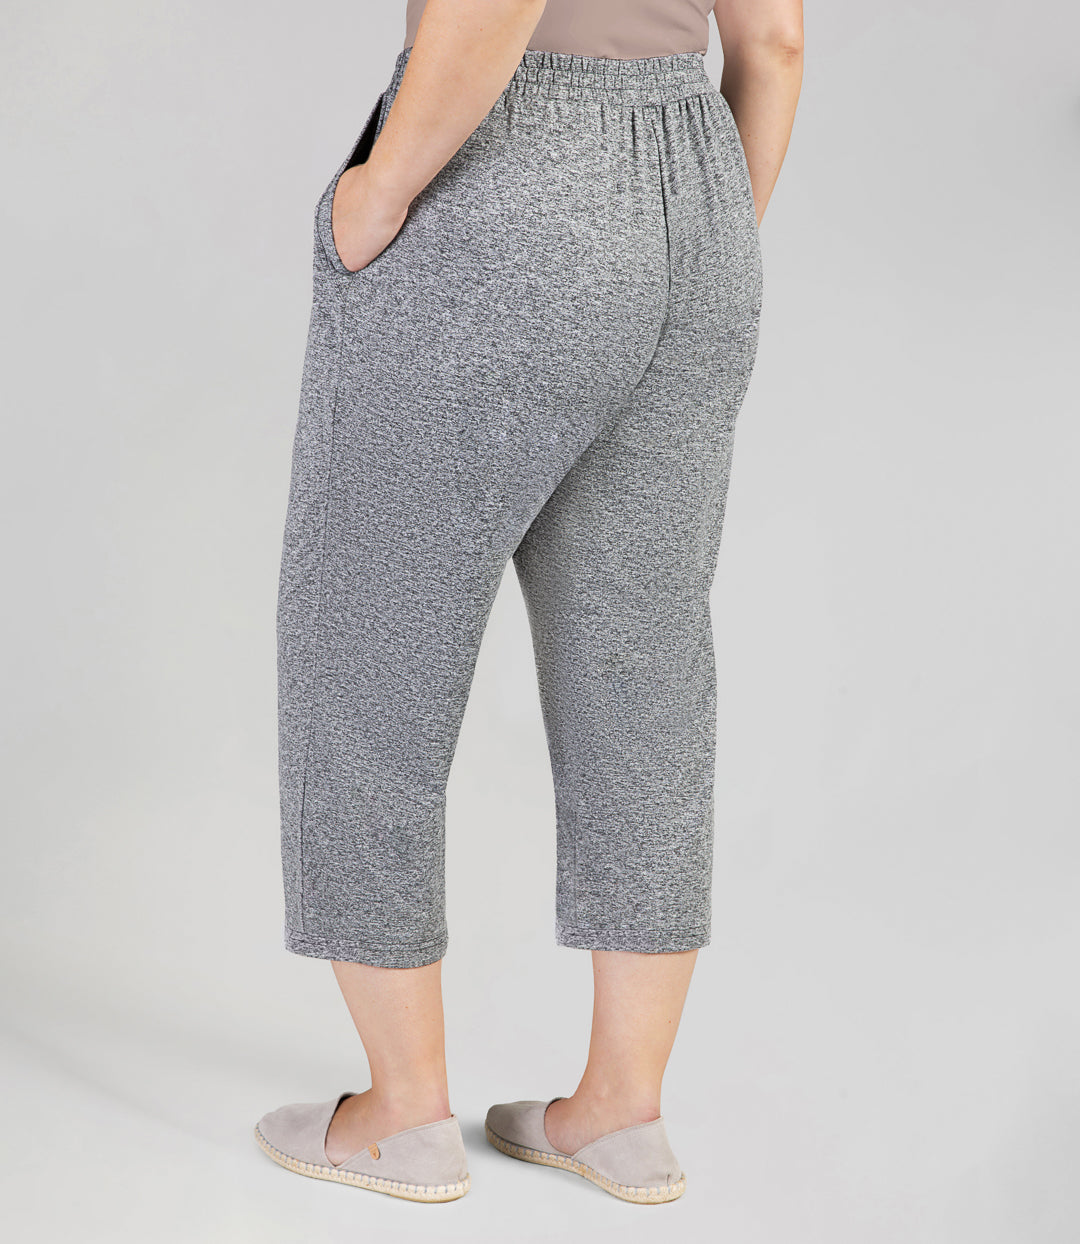 Back view, bottom half of plus sized woman, wearing JunoActives SoftWik Relaxed Fit Long Capris with Pockets in heather grey. Hemline ends at mid-calf of model.